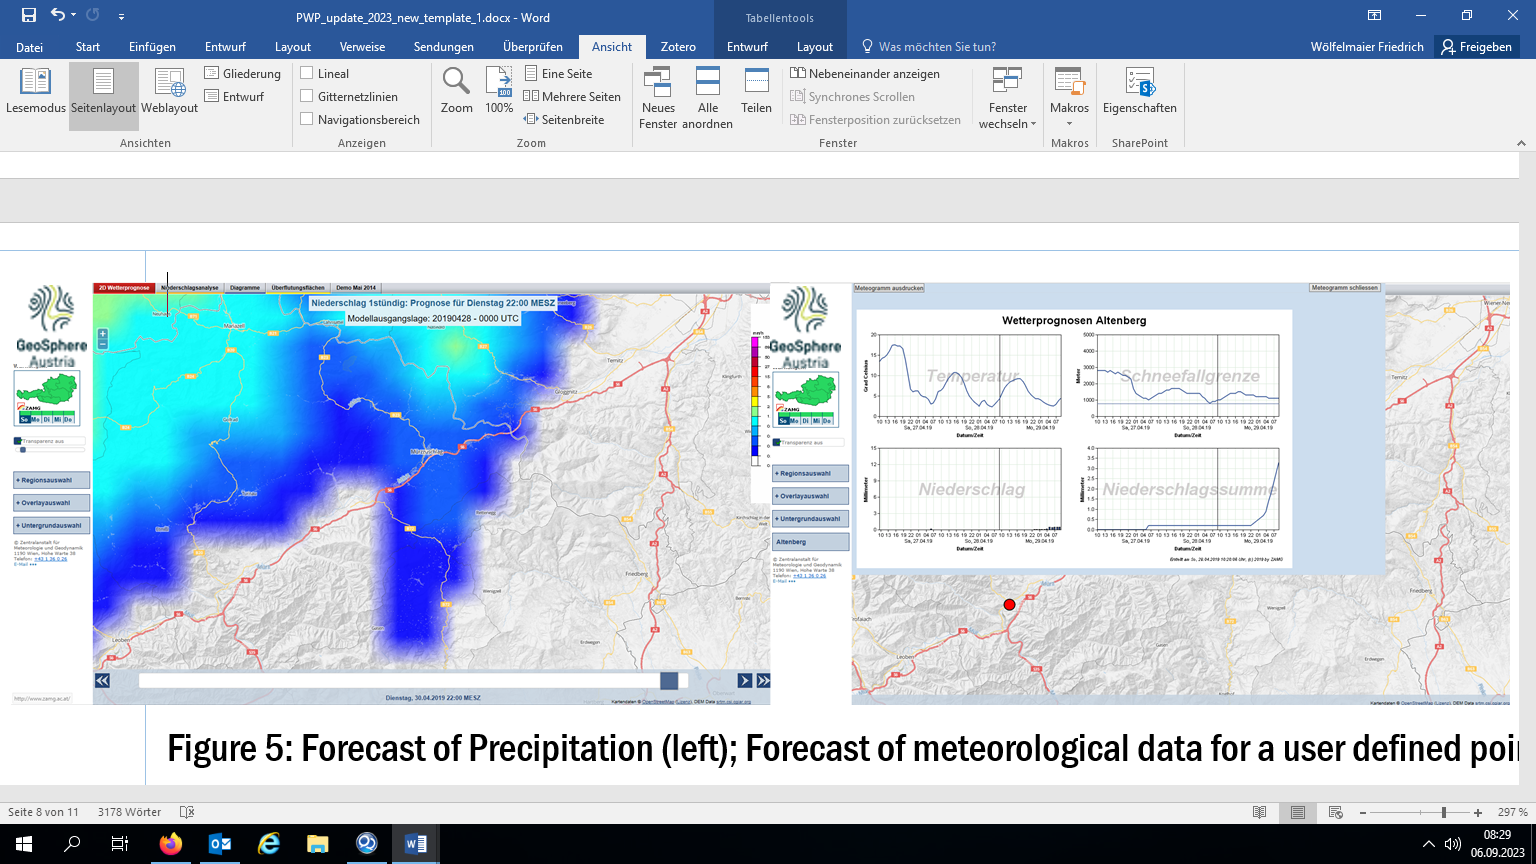 Figure 5: Forecast of Precipitation (left); Forecast of meteorological data for a user defined point (right)